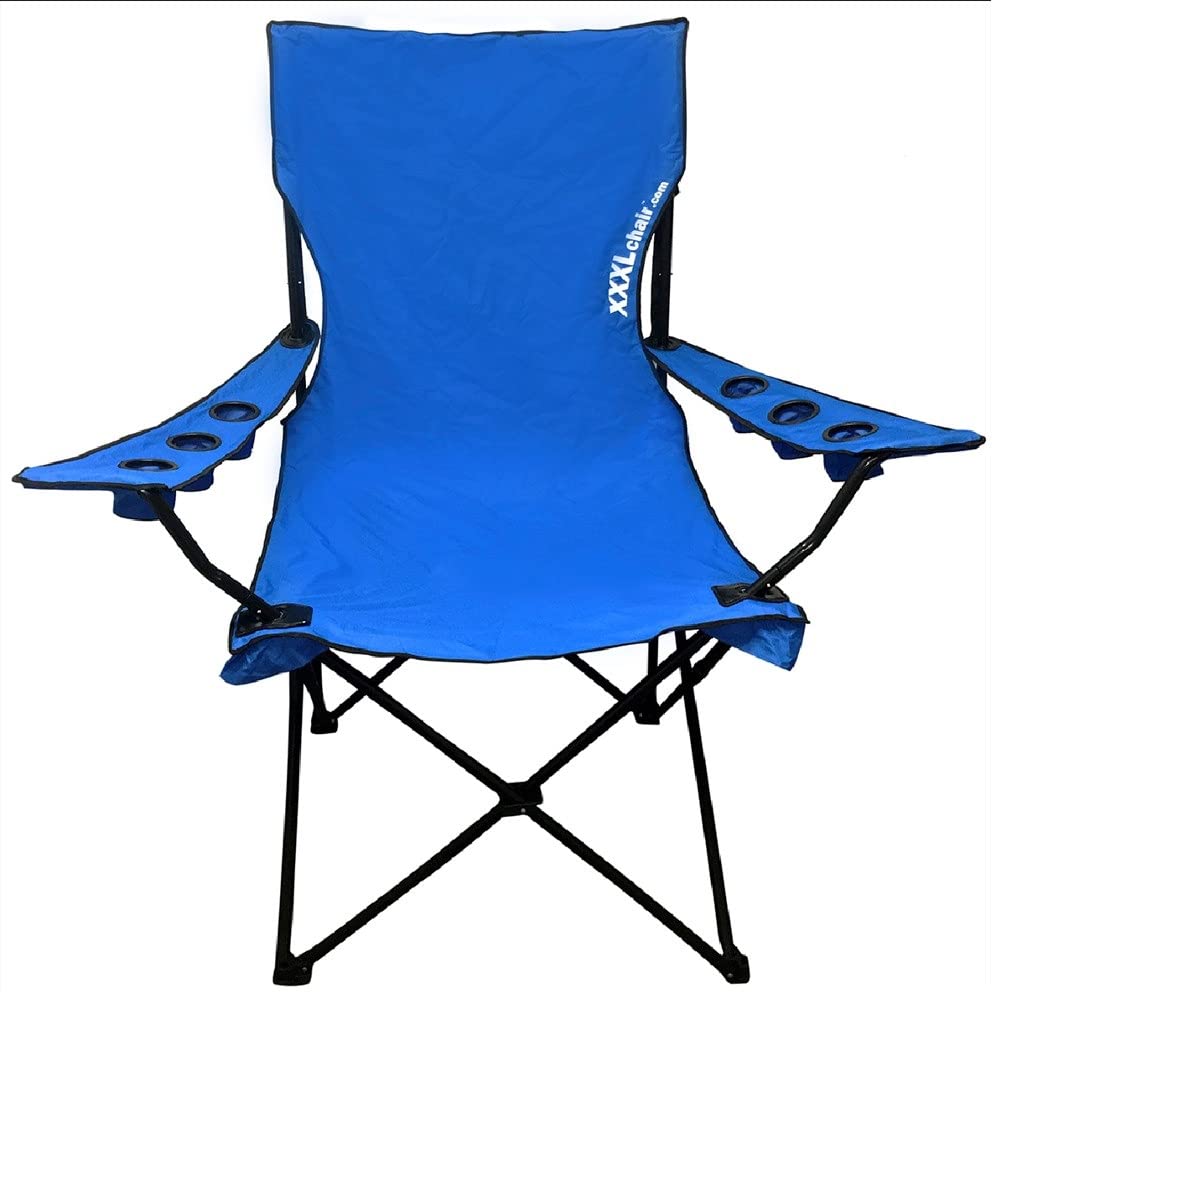 Giant Oversized Big Portable Folding Camping Beach Outdoor Chair with 6 Cup Holders! Fold Compact into Carry Bag!